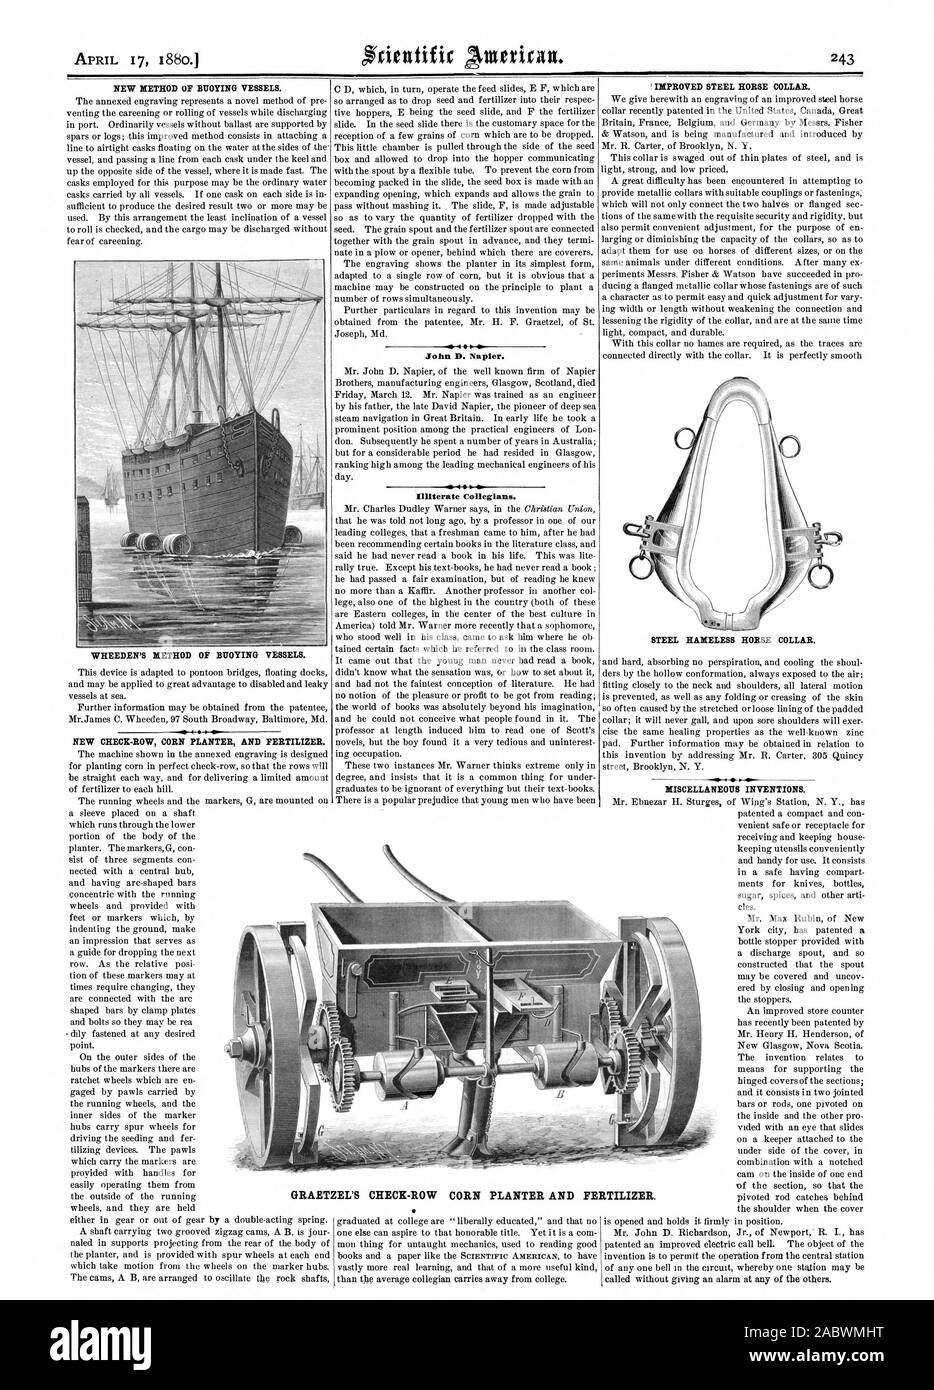 NEW METHOD OF BUOYING VESSELS. WHEEDEN'S METHOD OF BUOYING VESSELS. 4  John D. Napier. Illiterate Collegians. IMPROVED STEEL HORSE COLLAR. STEEL HADIELESS HORSE COLLAR. MISCELLANEOUS INVENTIONS. GRAETZEL'S CHECK-ROW CORN PLANTER AND FERTILIZER., scientific american, 1880-04-17 Stock Photo